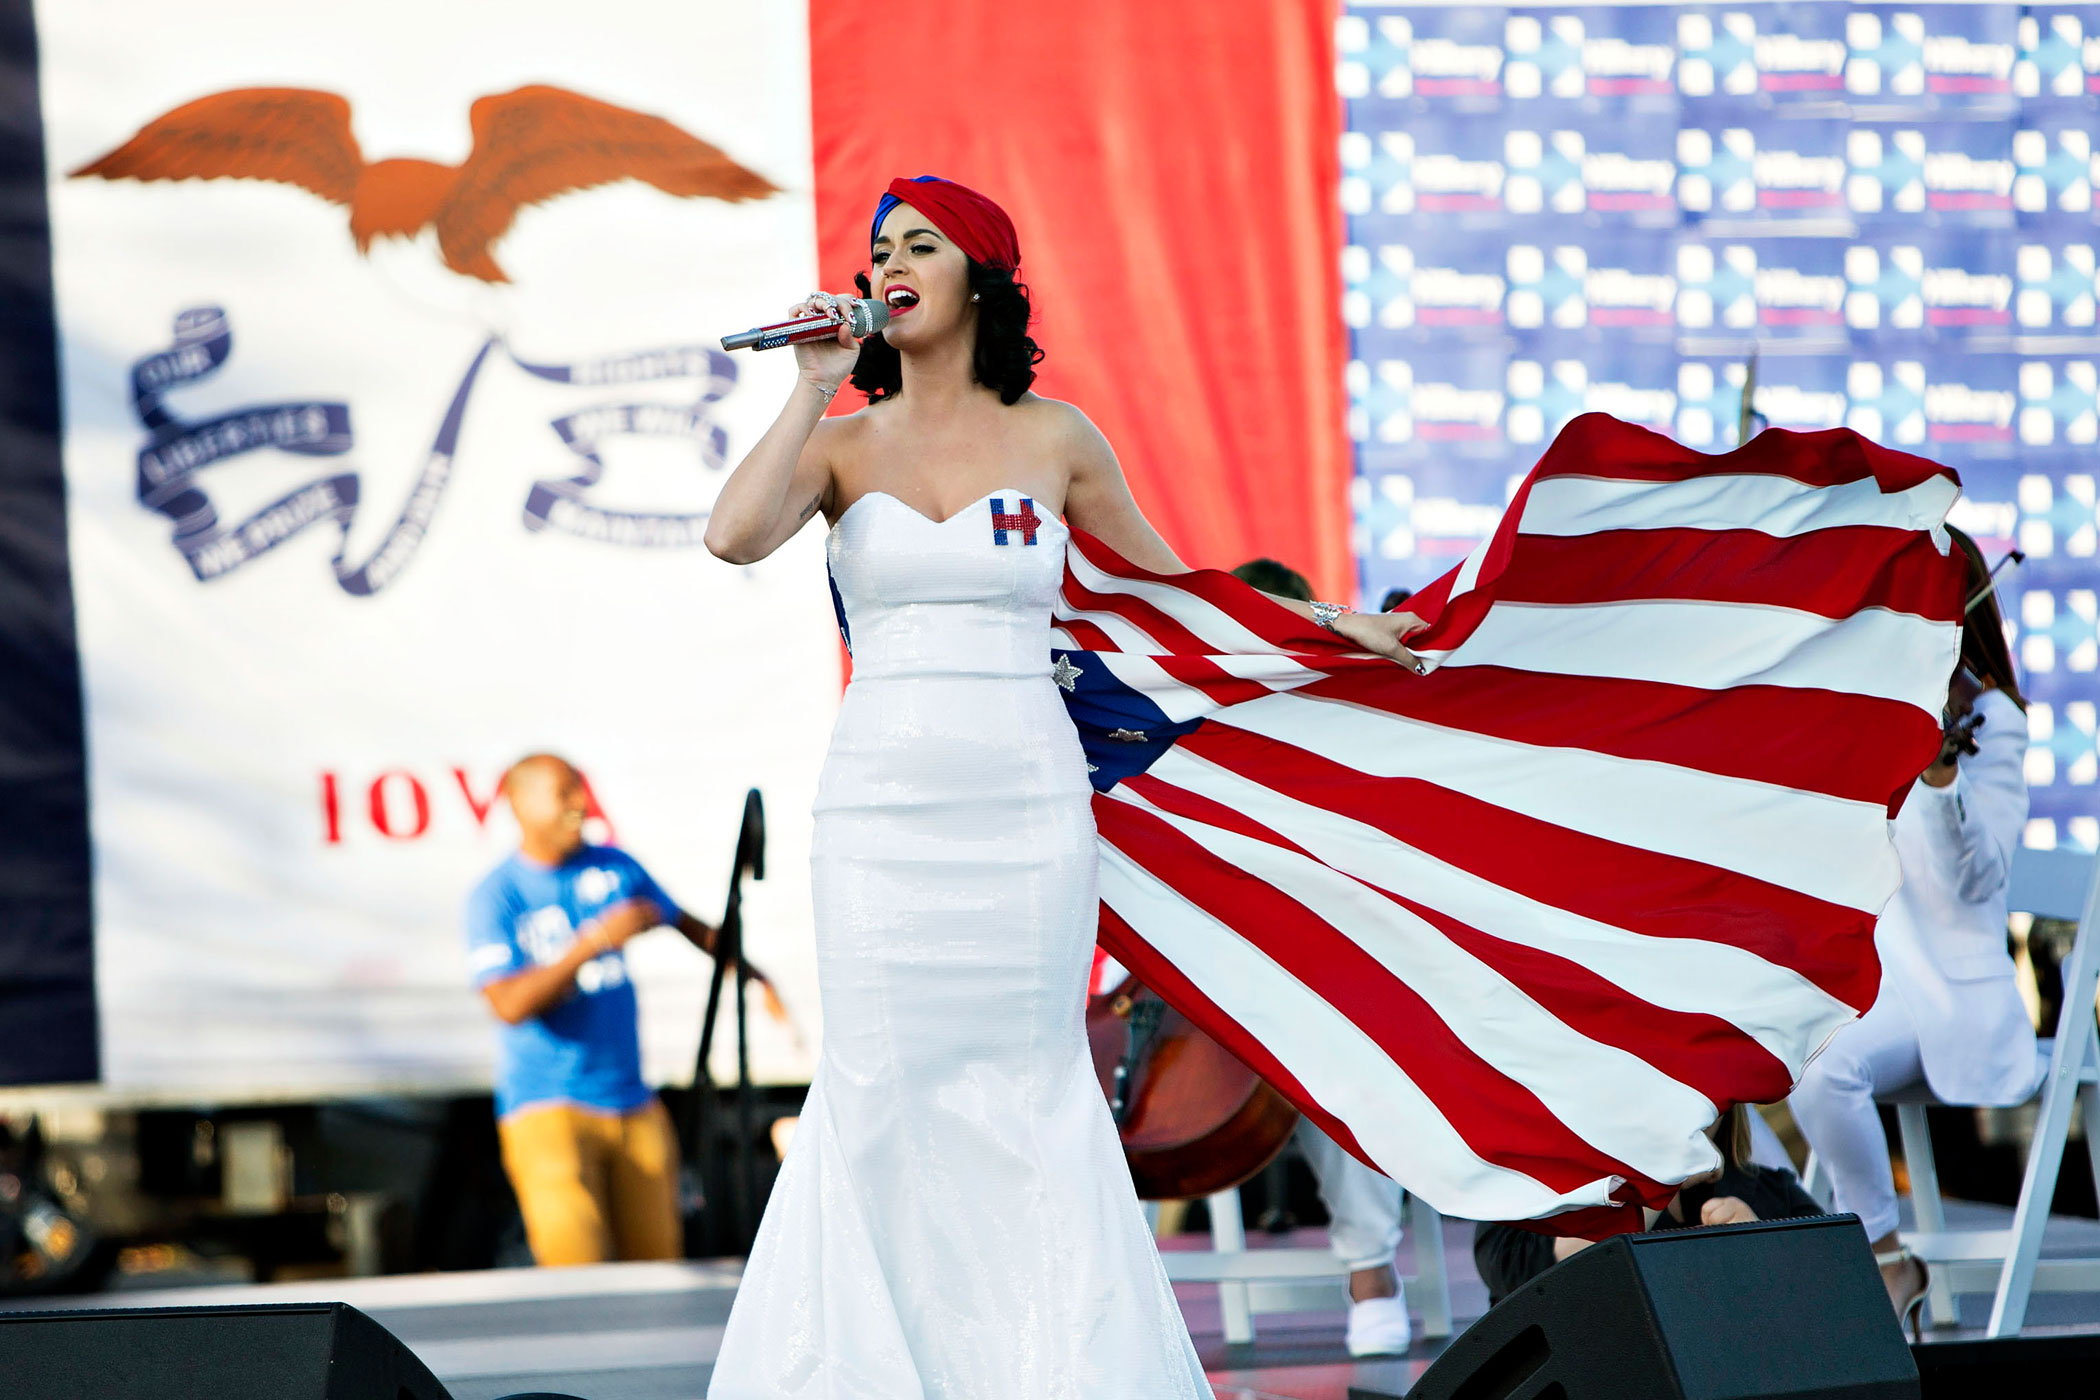 Singer Katy Perry performed during a rally for Hillary Clinton, who she publicly supports.